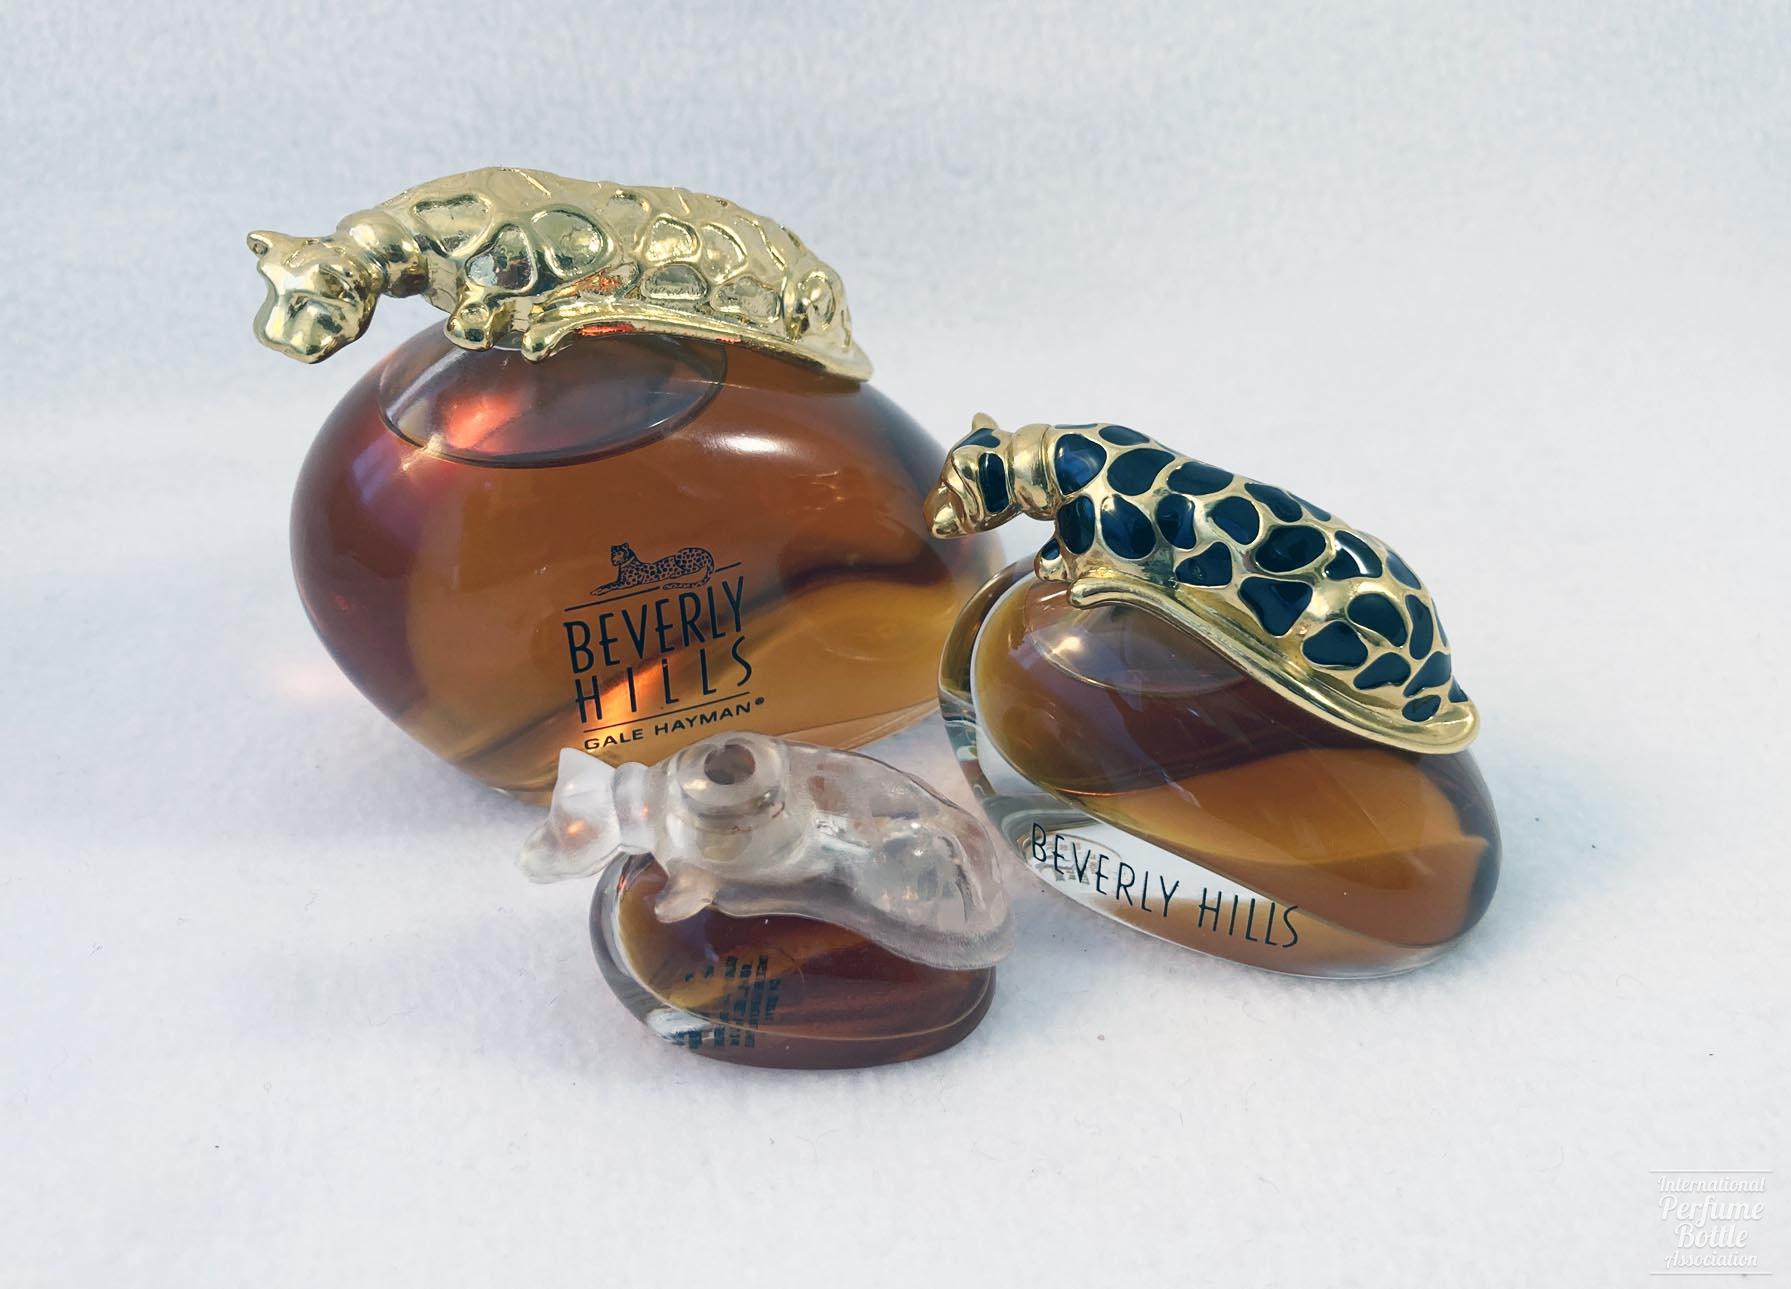 "Beverly Hills" Panther Bottles by Gale Hayman